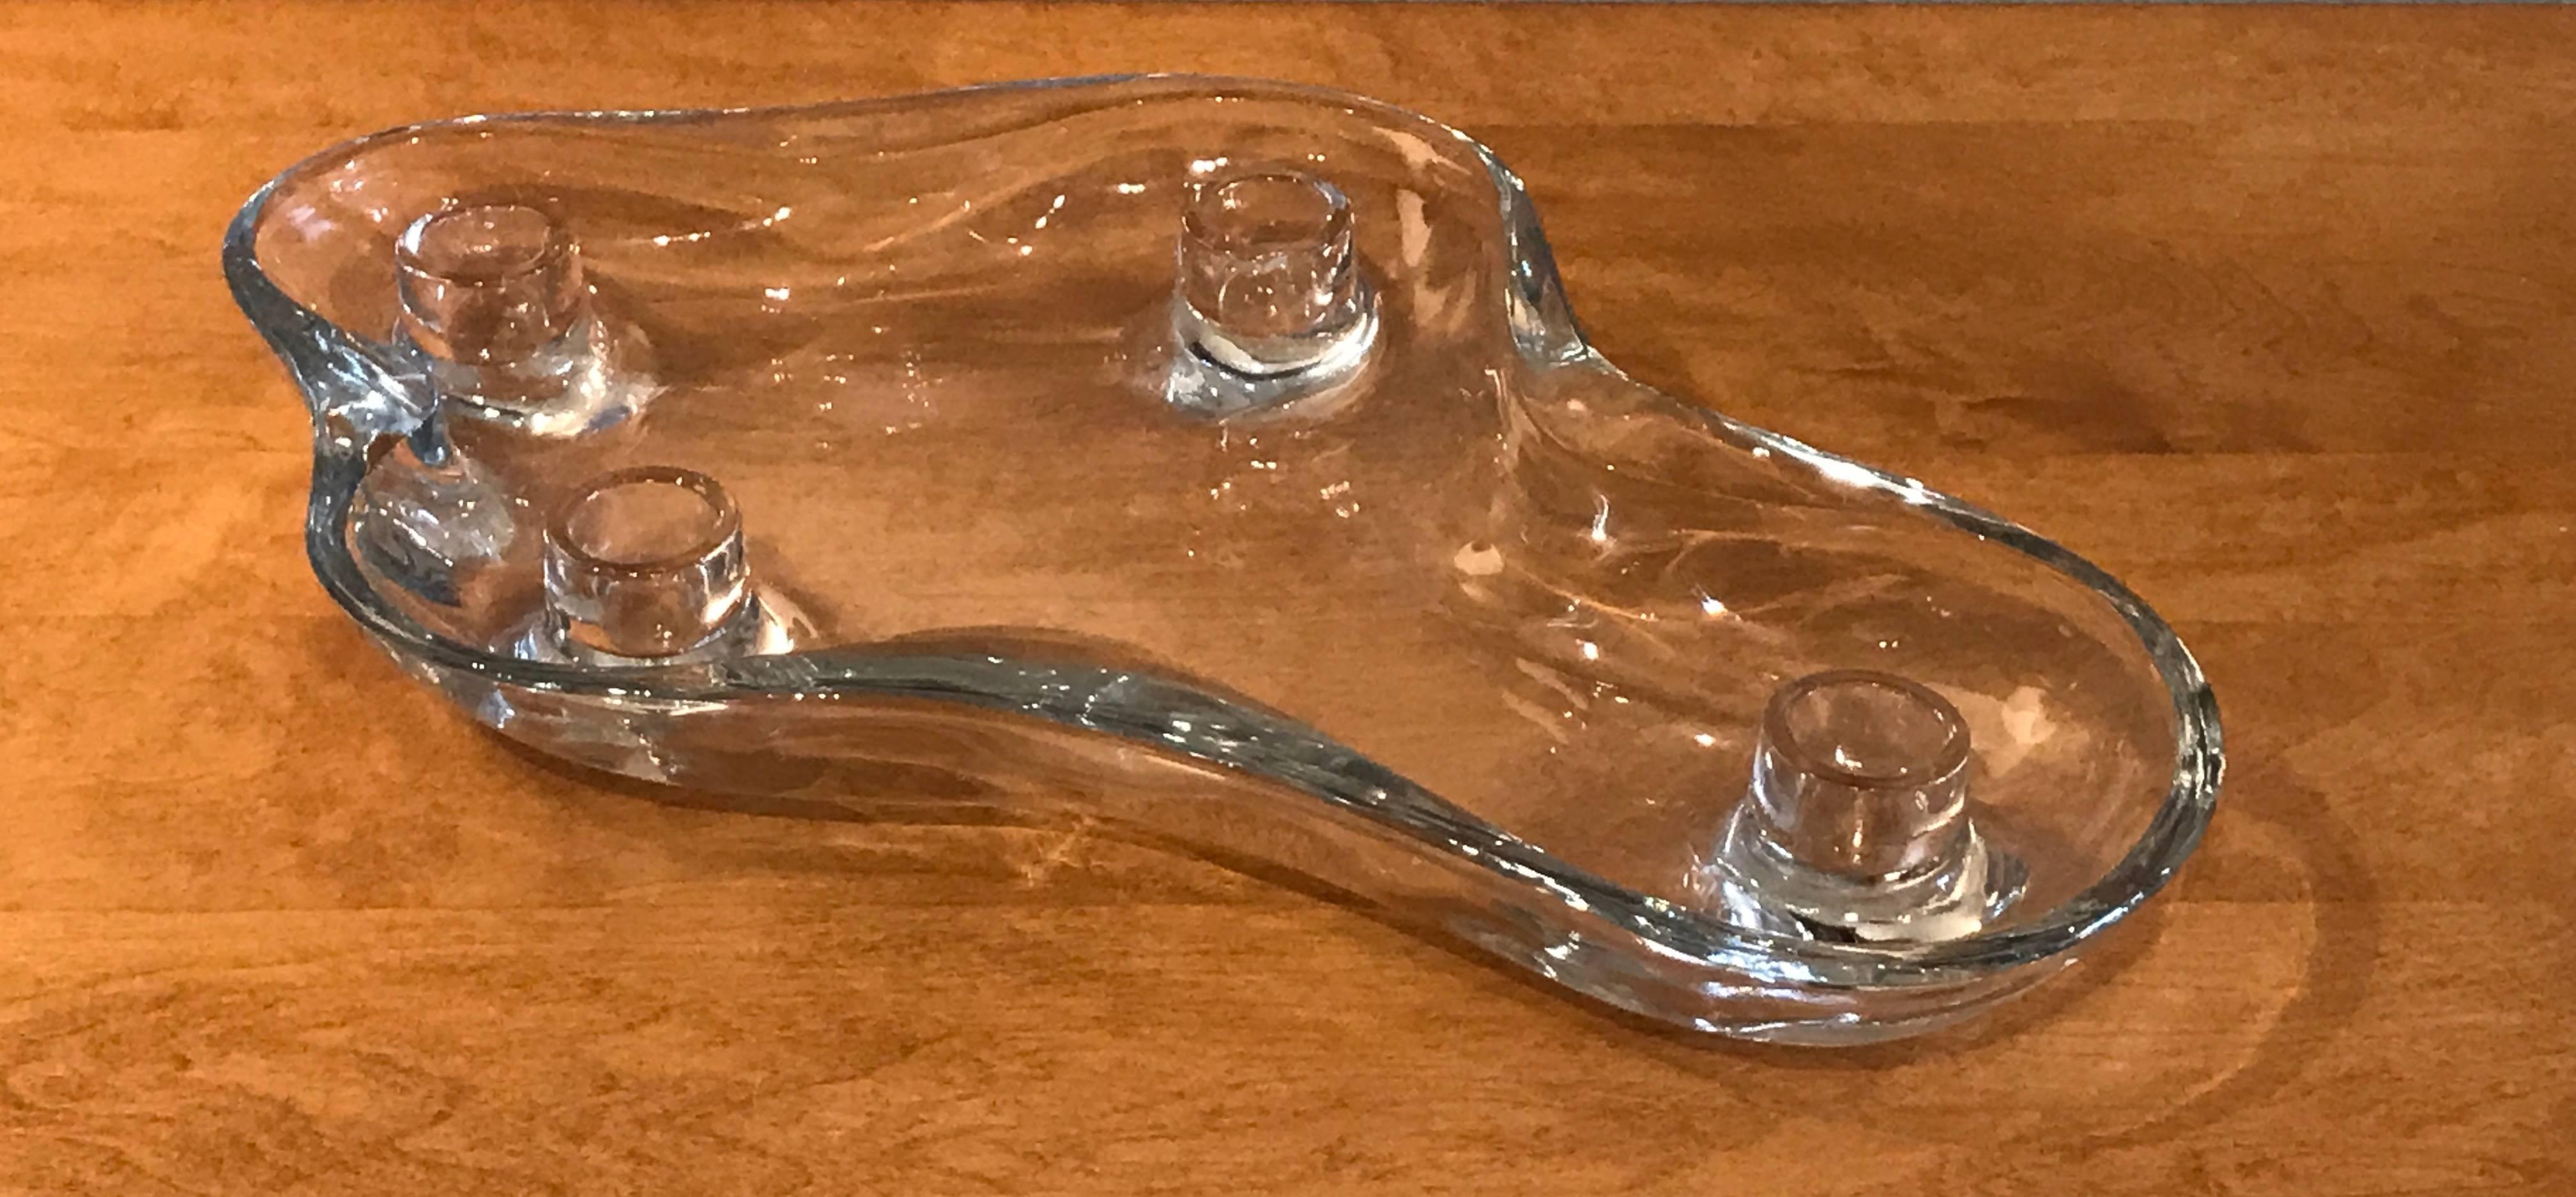 Candleholder and flower floater by Finnish-emigre compatriot Eva Lisa Saarinen Swanson with its elegantly curvilinear form of 1948-50 for the U.S. Glass Company one of the early biomorphic designs put onto the market for Post War American home. The